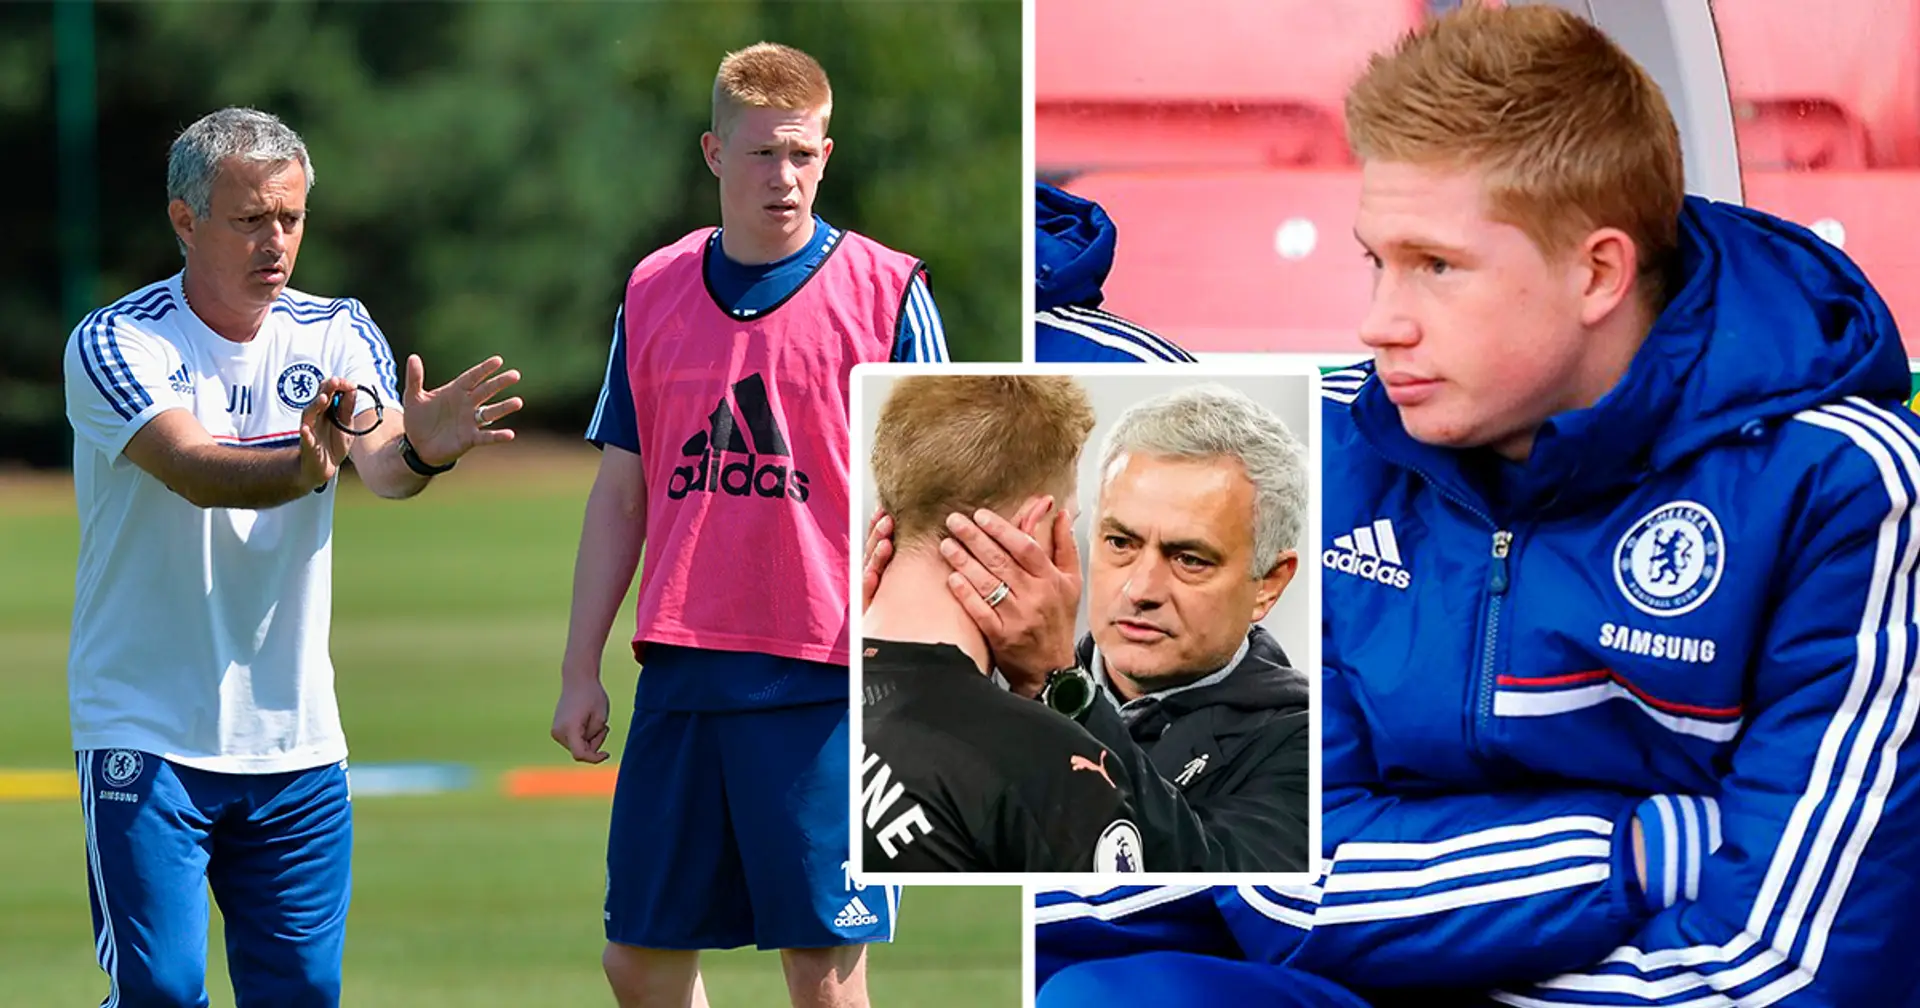 'It’s a myth that if you train well, you get chance': Kevin De Bruyne talks about his time at Chelsea and Mourinho